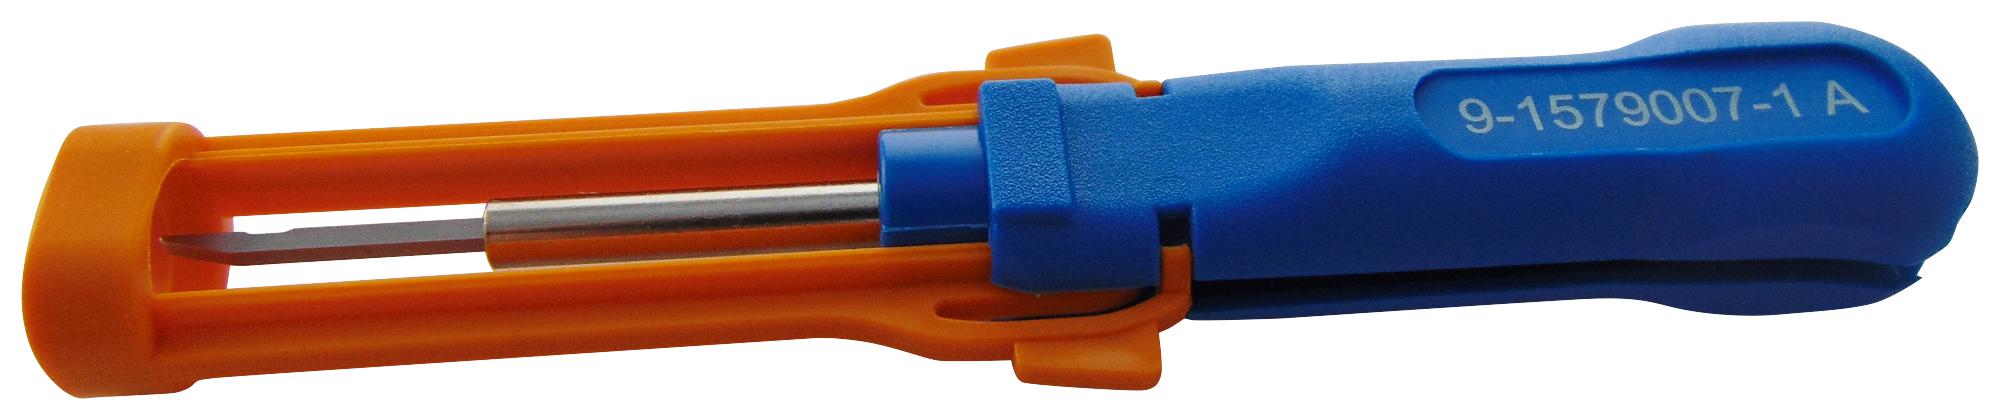 9-1579007-1 EXTRACTION TOOL, FOR CONTACTS SUPERSEAL AMP - TE CONNECTIVITY